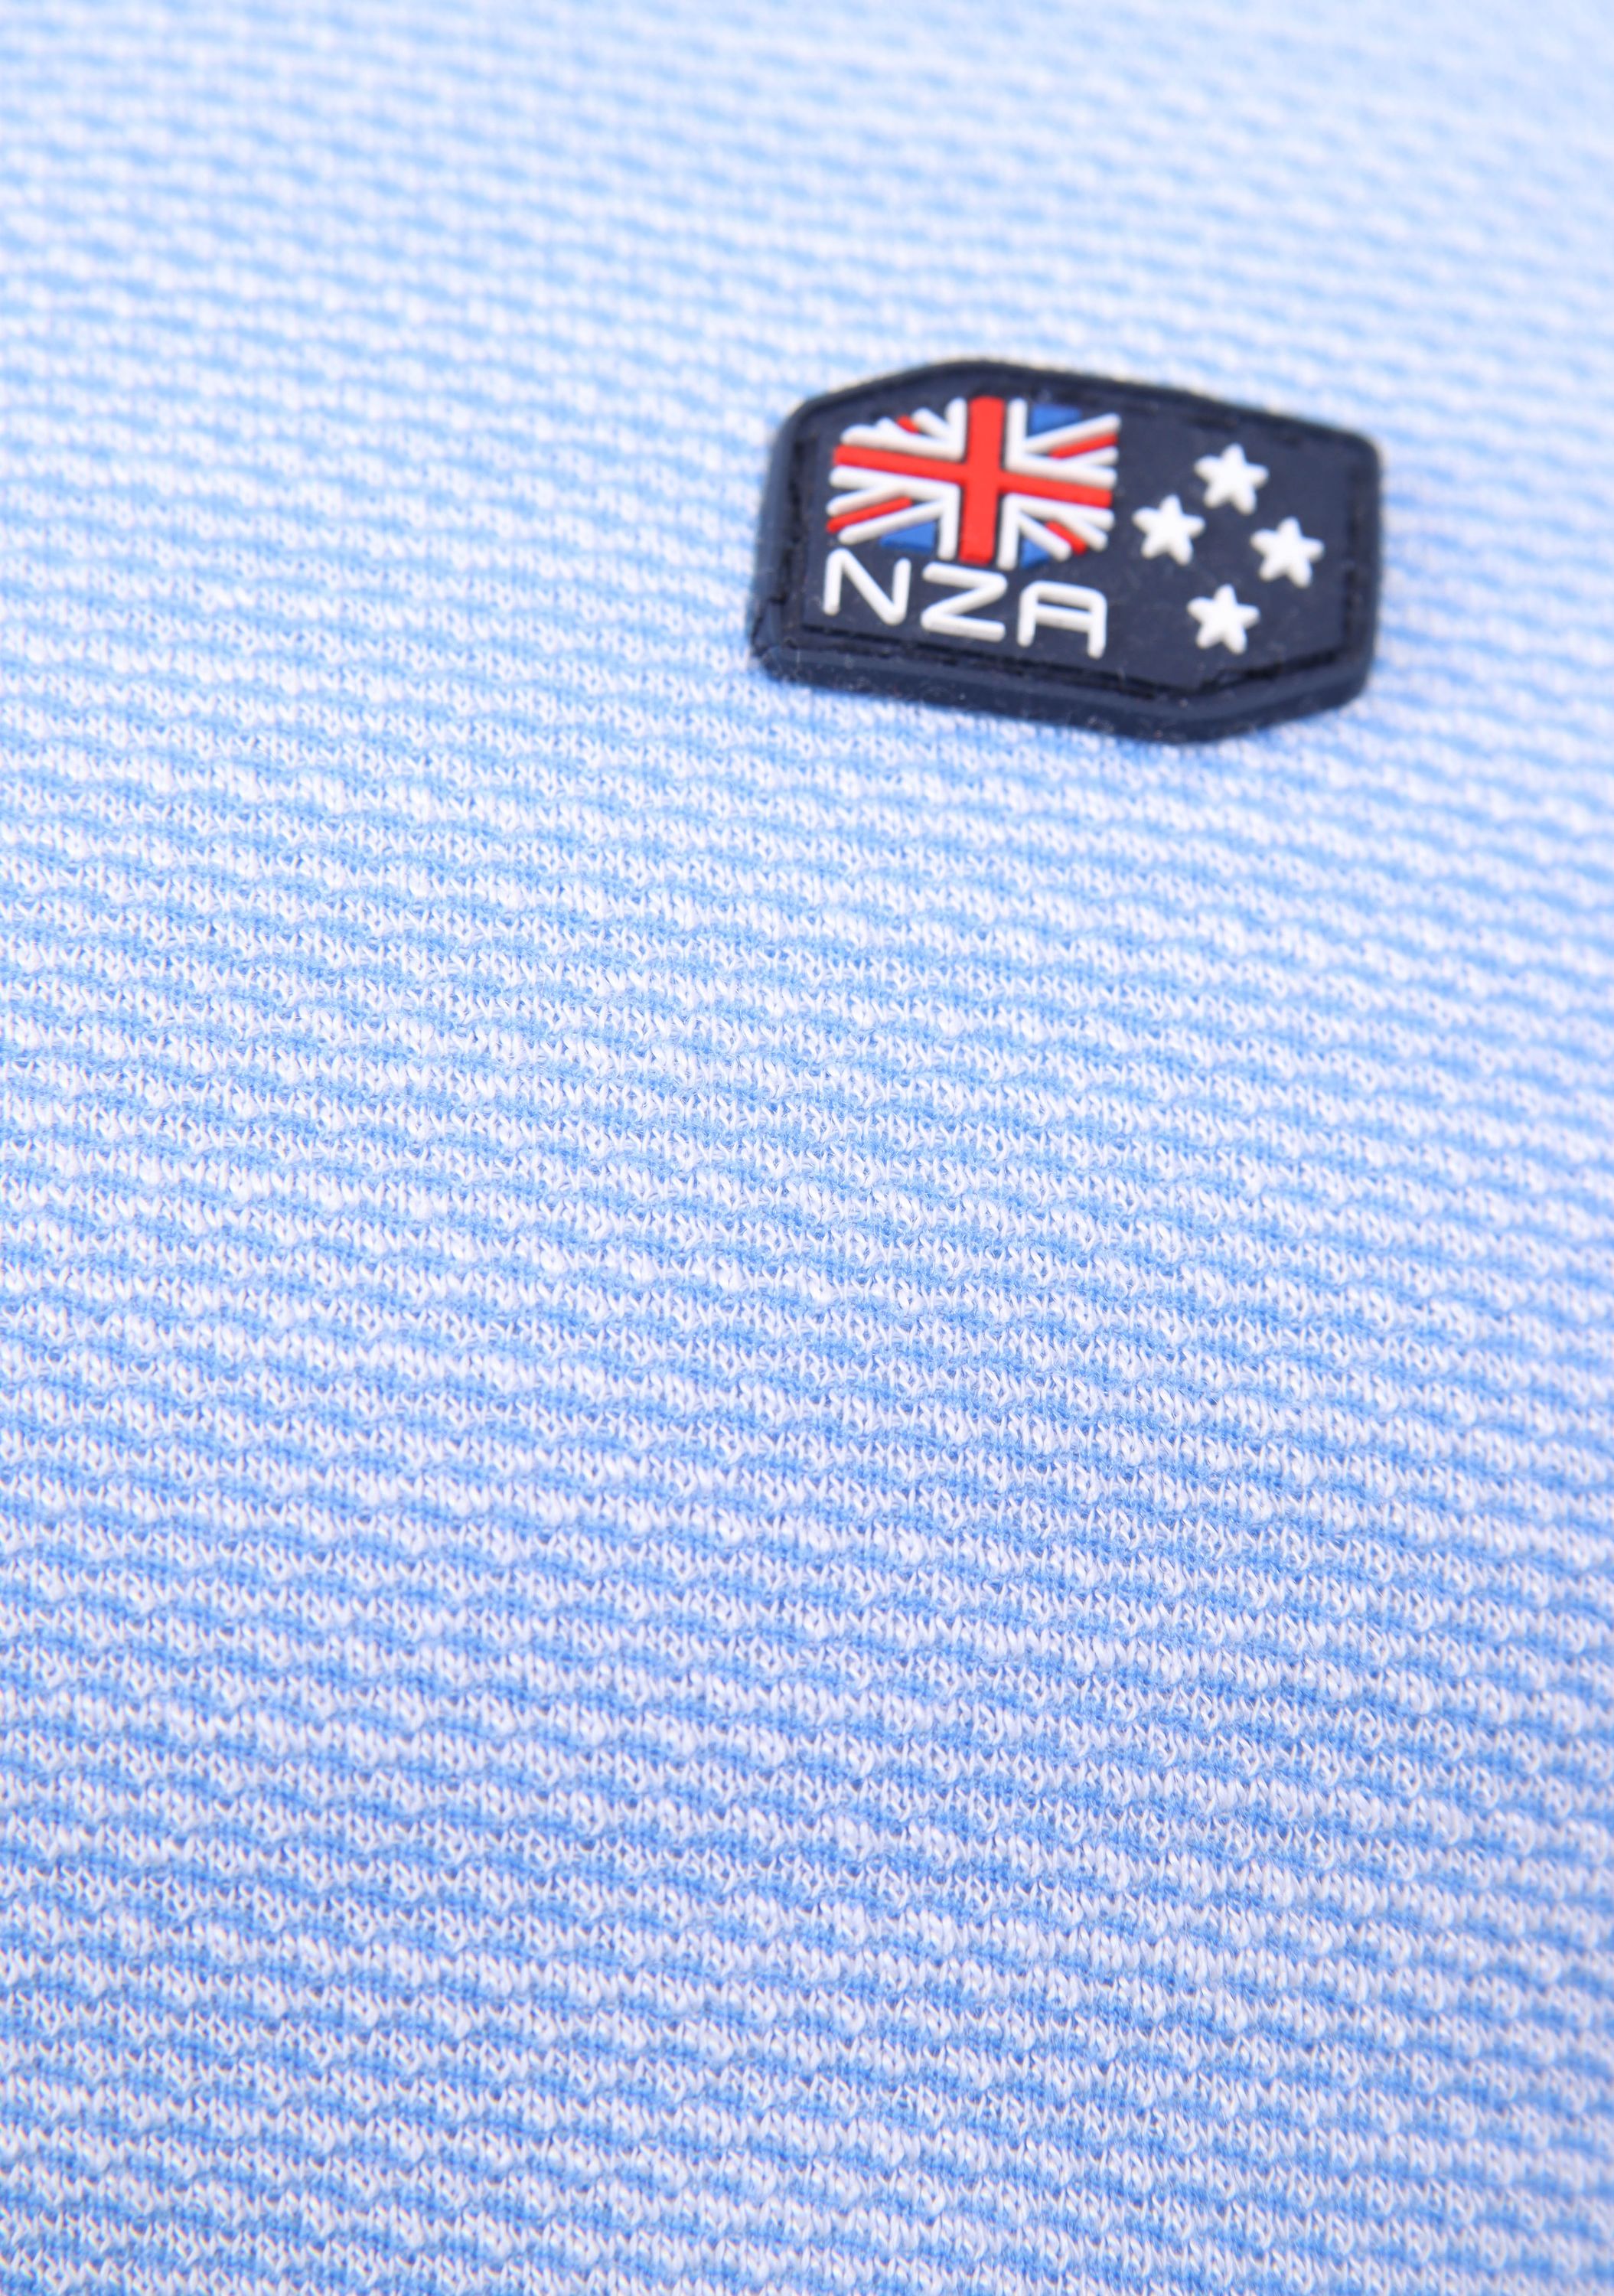 NZA NEW ZEALAND AUCKLAND POLO